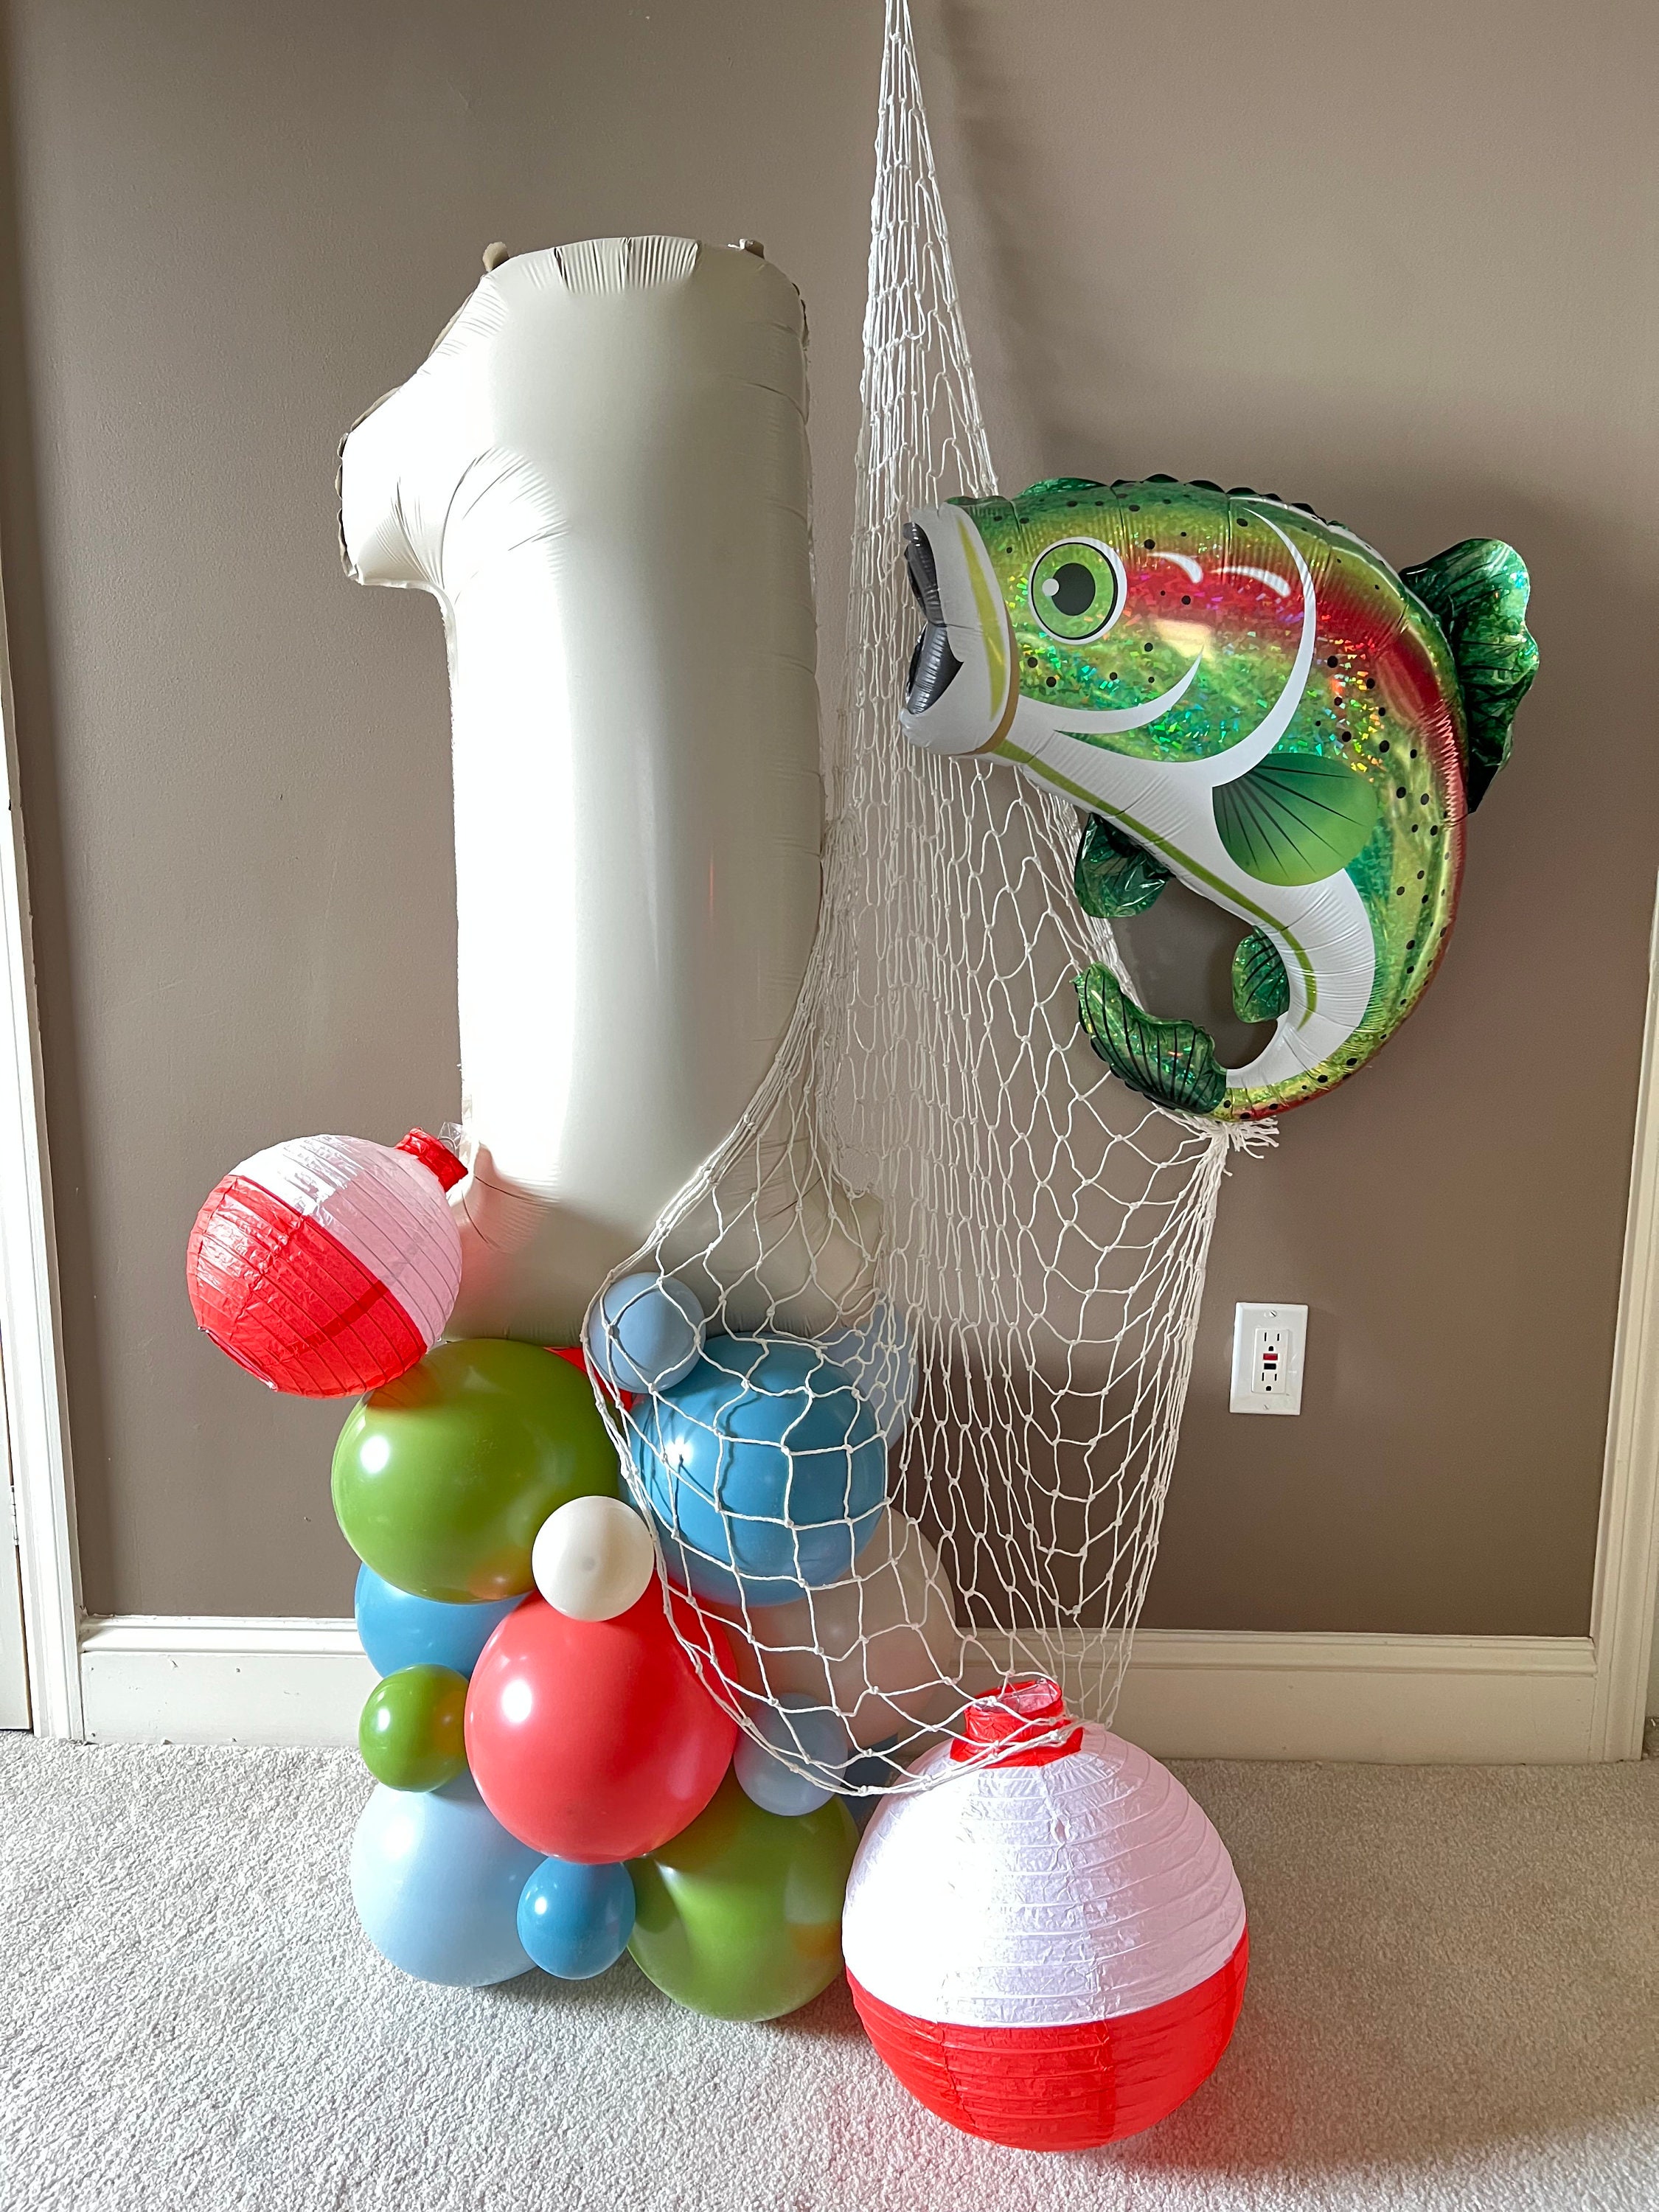 OFISHally One Balloon Tower Kit | Gone Fishing Balloons | The Big One  Birthday Party | Fish Birthday Party | Little Fisherman Balloons